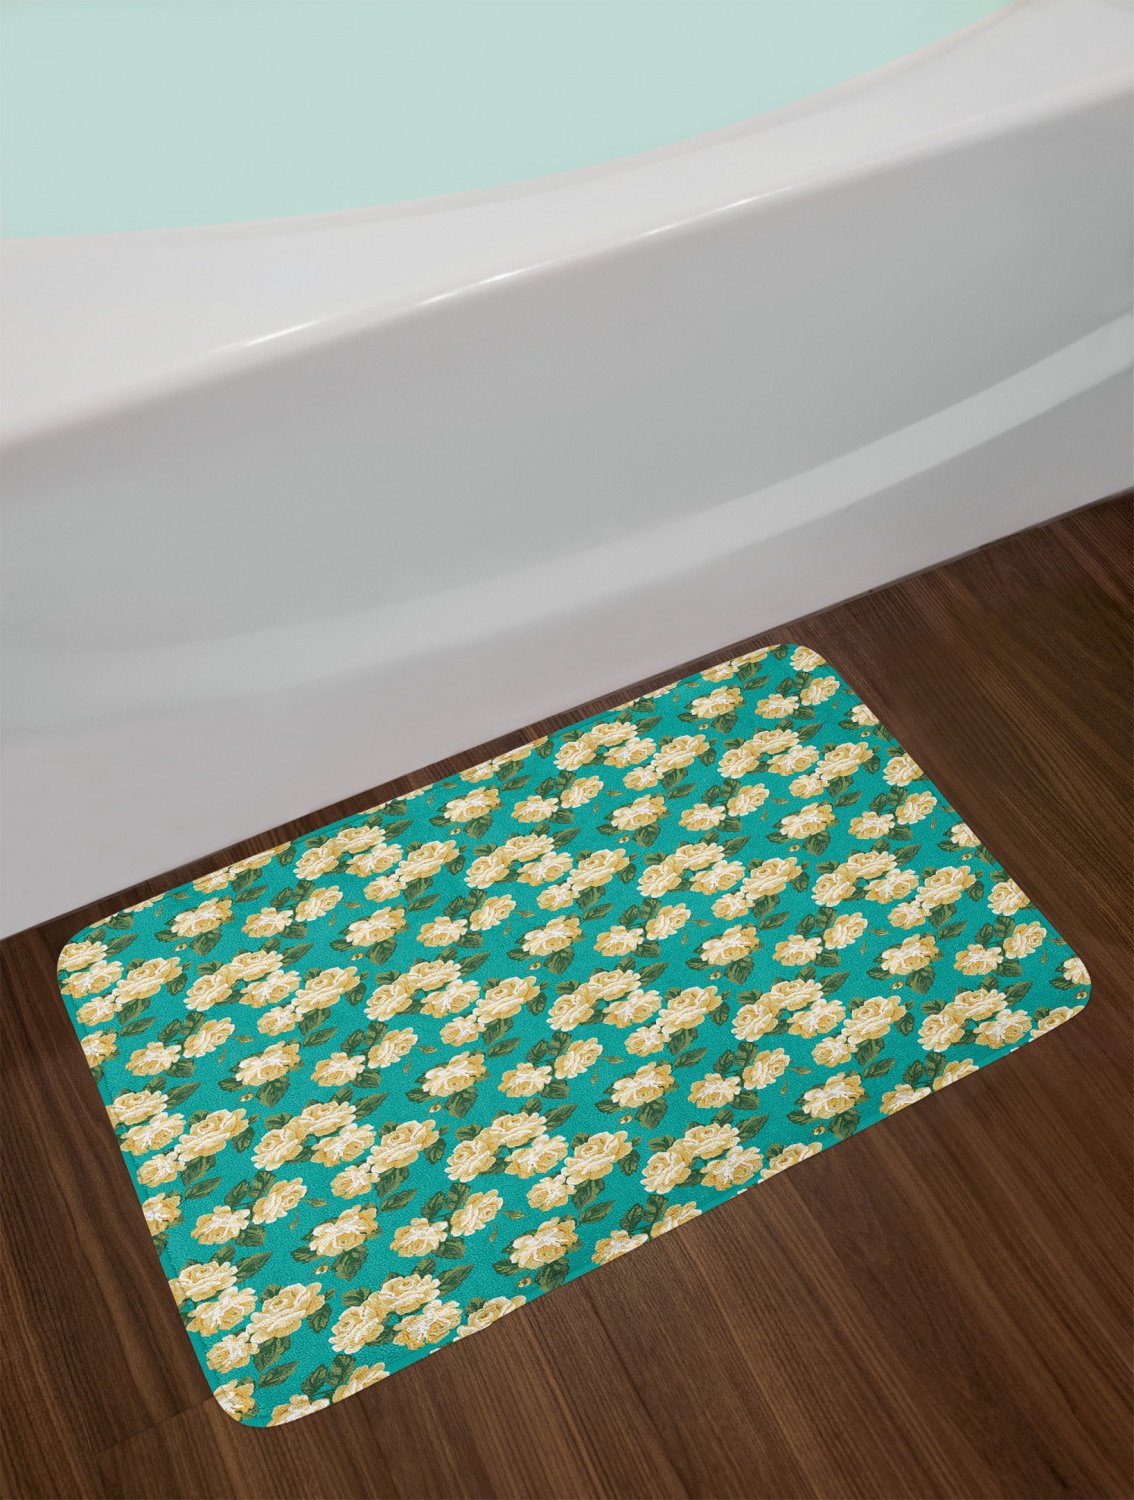 Yellow and Blue Bathroom Decor Awesome Blue and Yellow Bath Mat Bathroom Decor Plush Non Slip Mat 29 5&quot; X 17 5&quot;